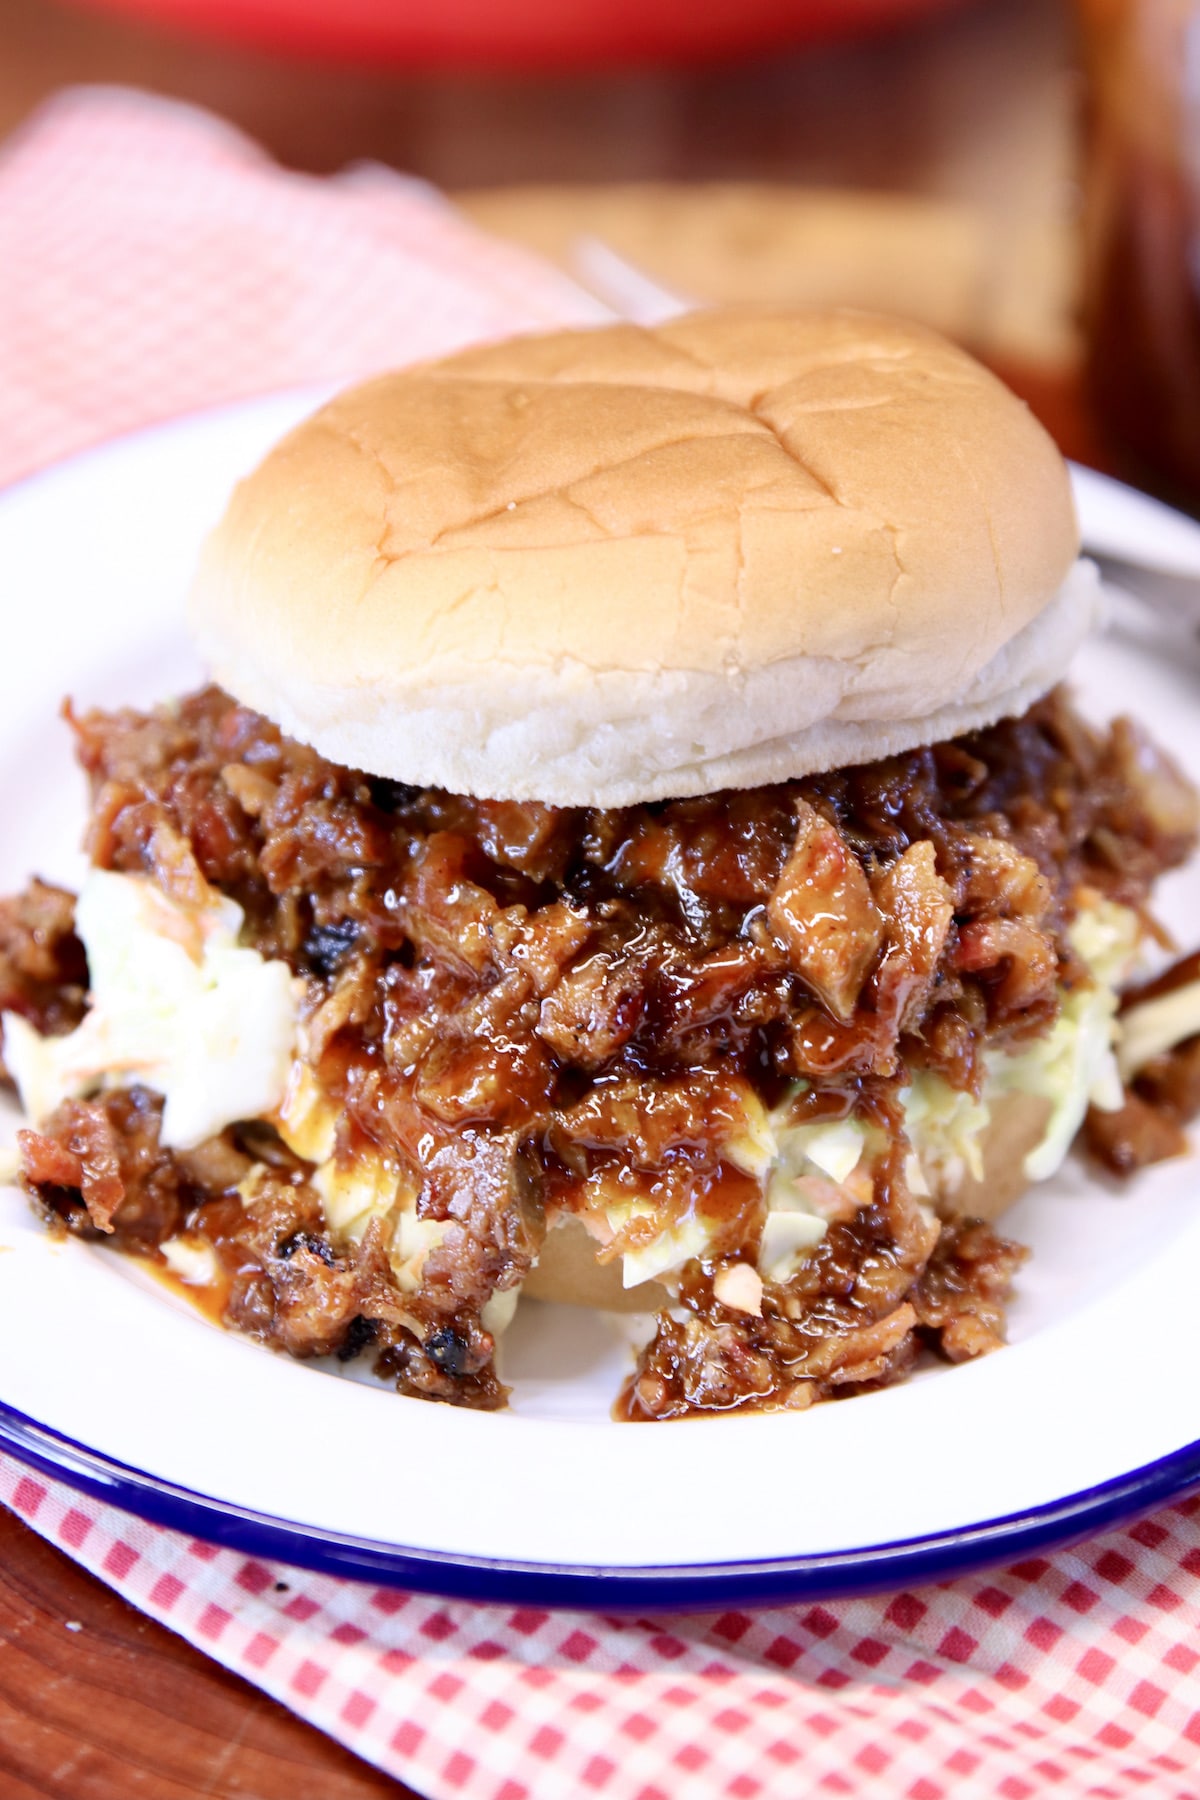 BBQ sandwich with slaw on a plate.